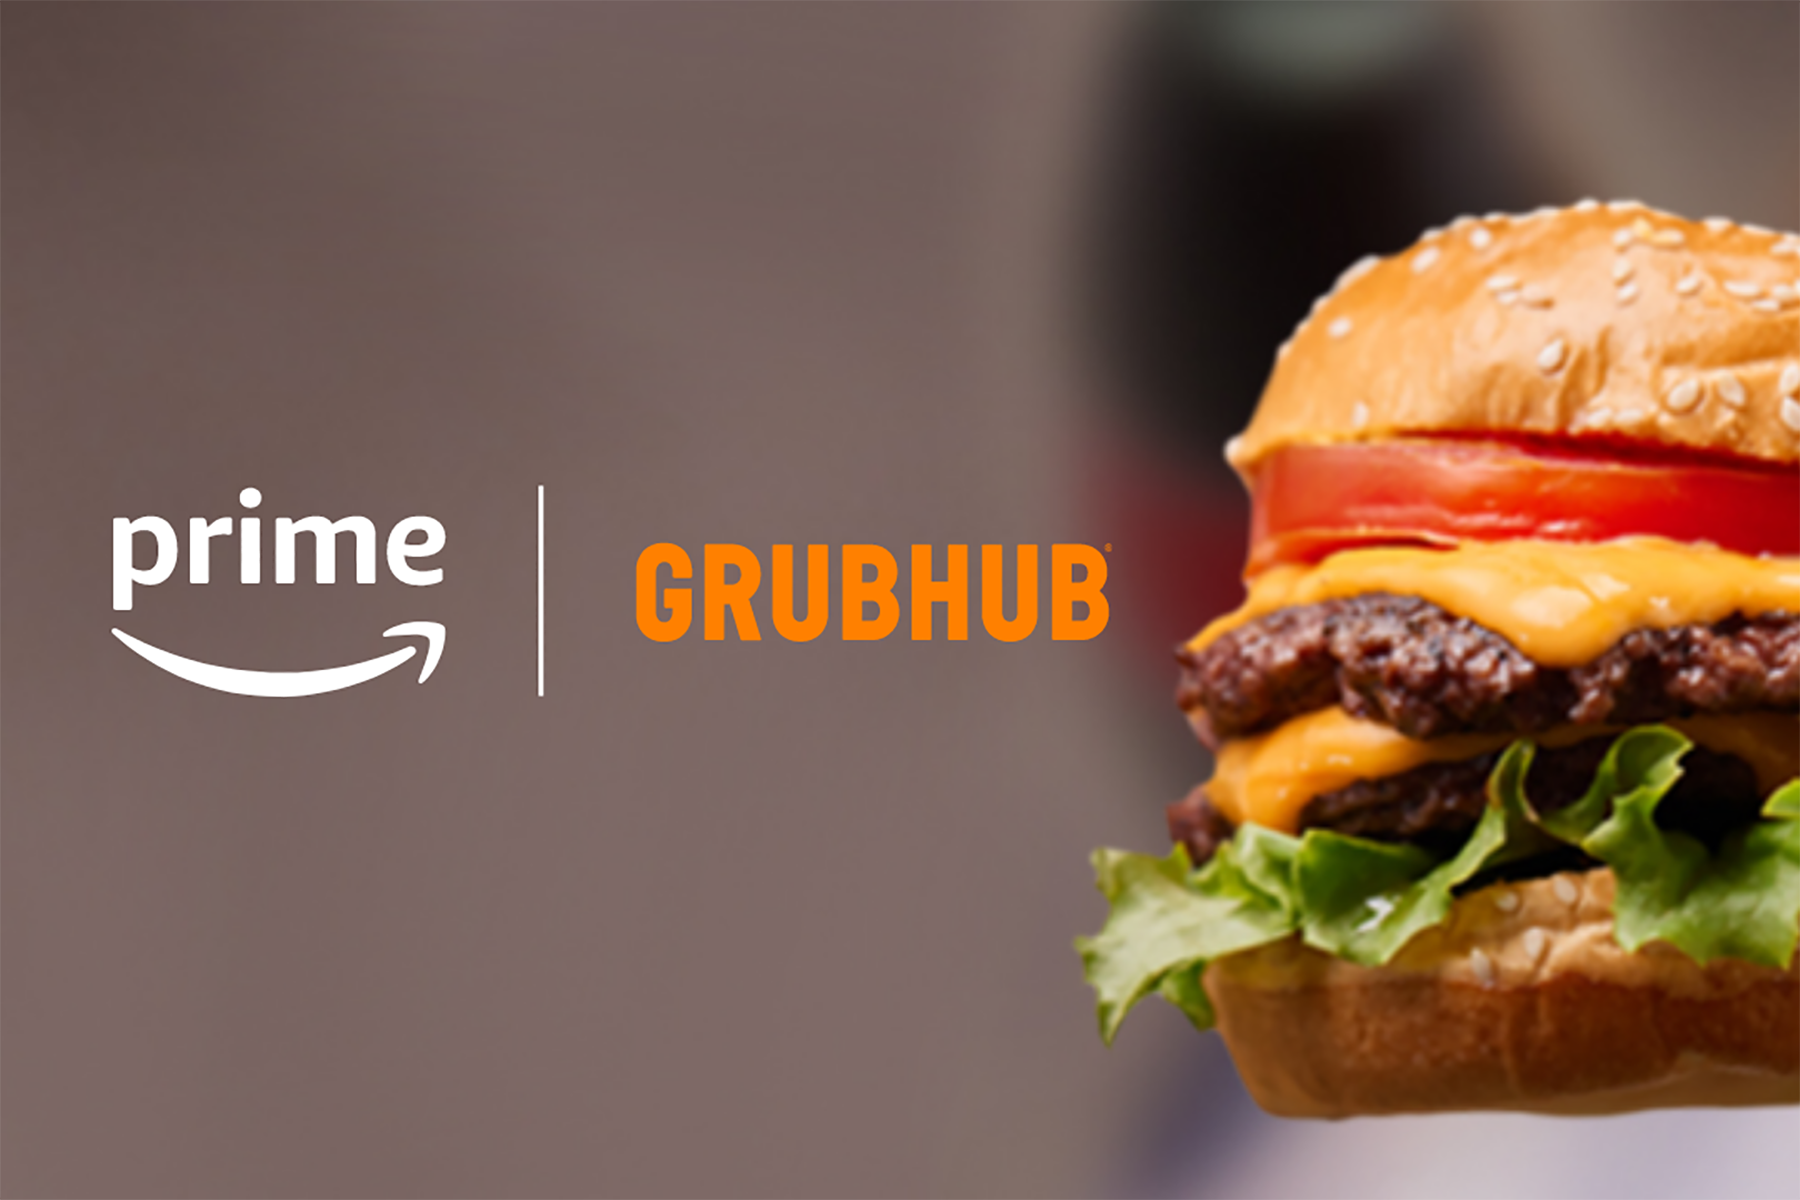 Amazon logo, GrubHub logo, and a picture of a burger next to each other